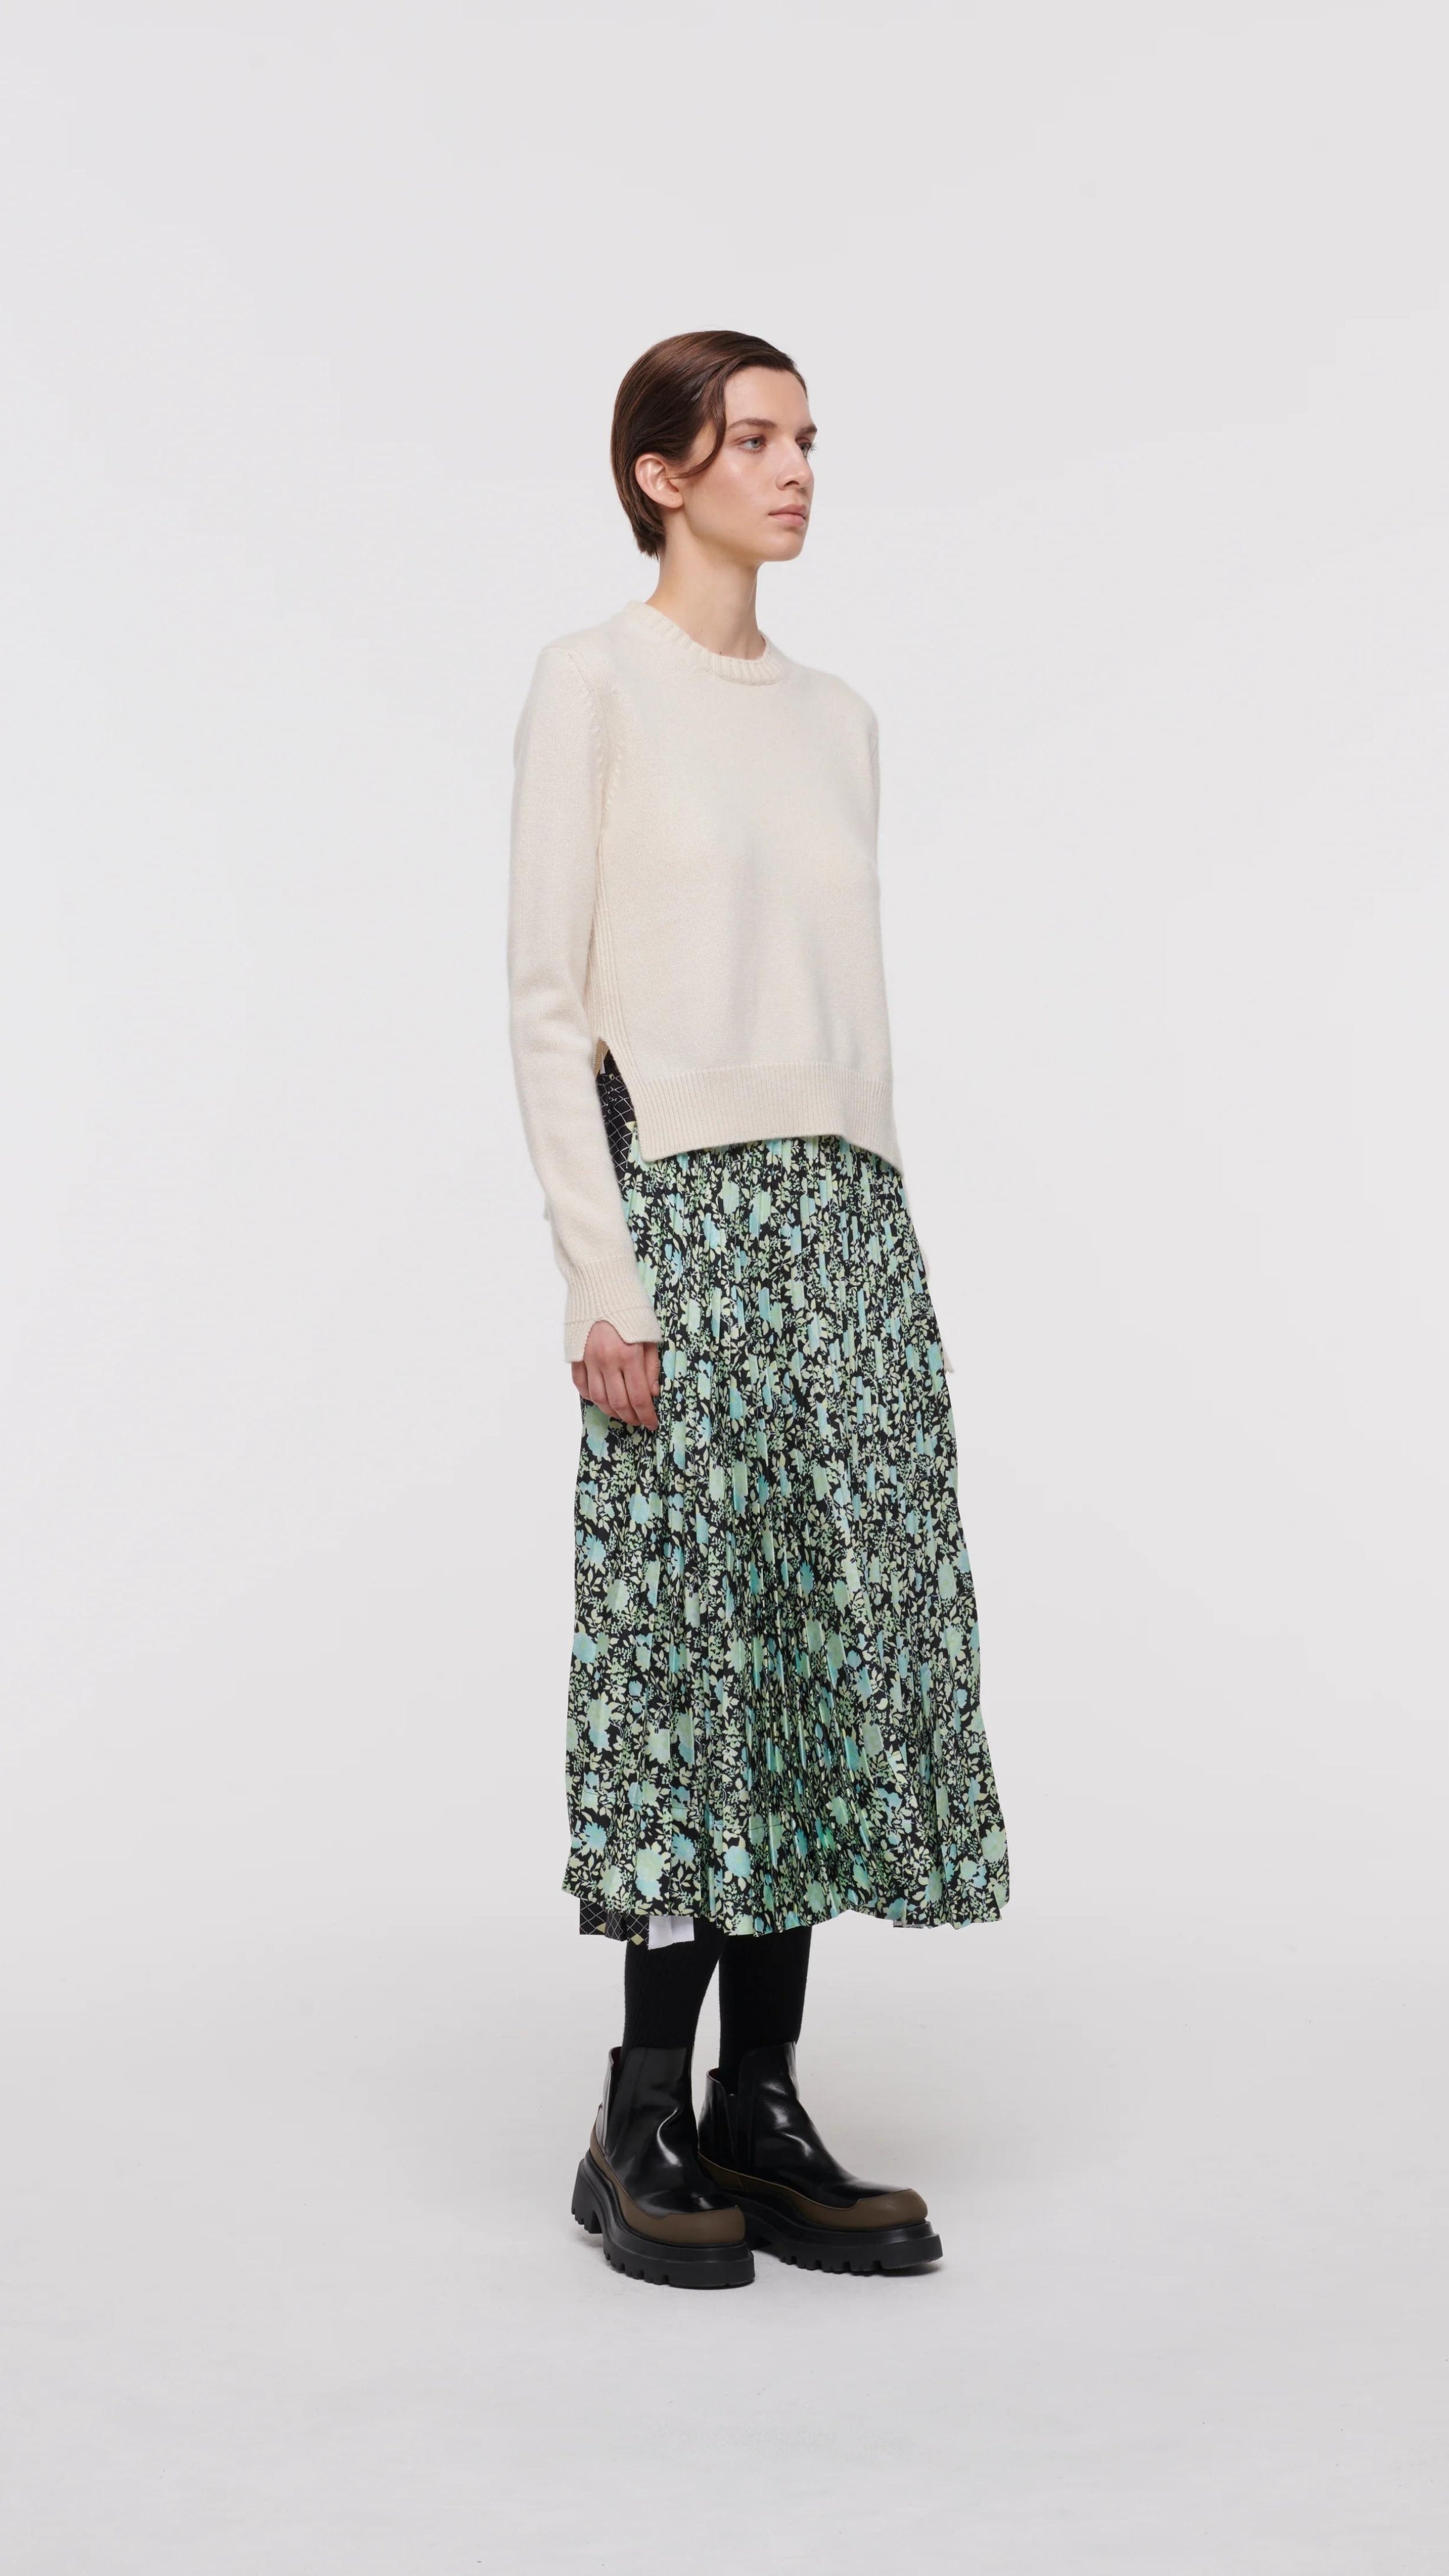 Plan C Pleated Midi Skirt in Backlit Dahlia Print.  Featuring alternating geometrical and flower prints, a slender pleated front, and larger pleating on the back, this skirt falls to a midi length asymmetric hem. The elasticated waist offers perfect comfort and easy fitting. Product photo shown from the front and side.